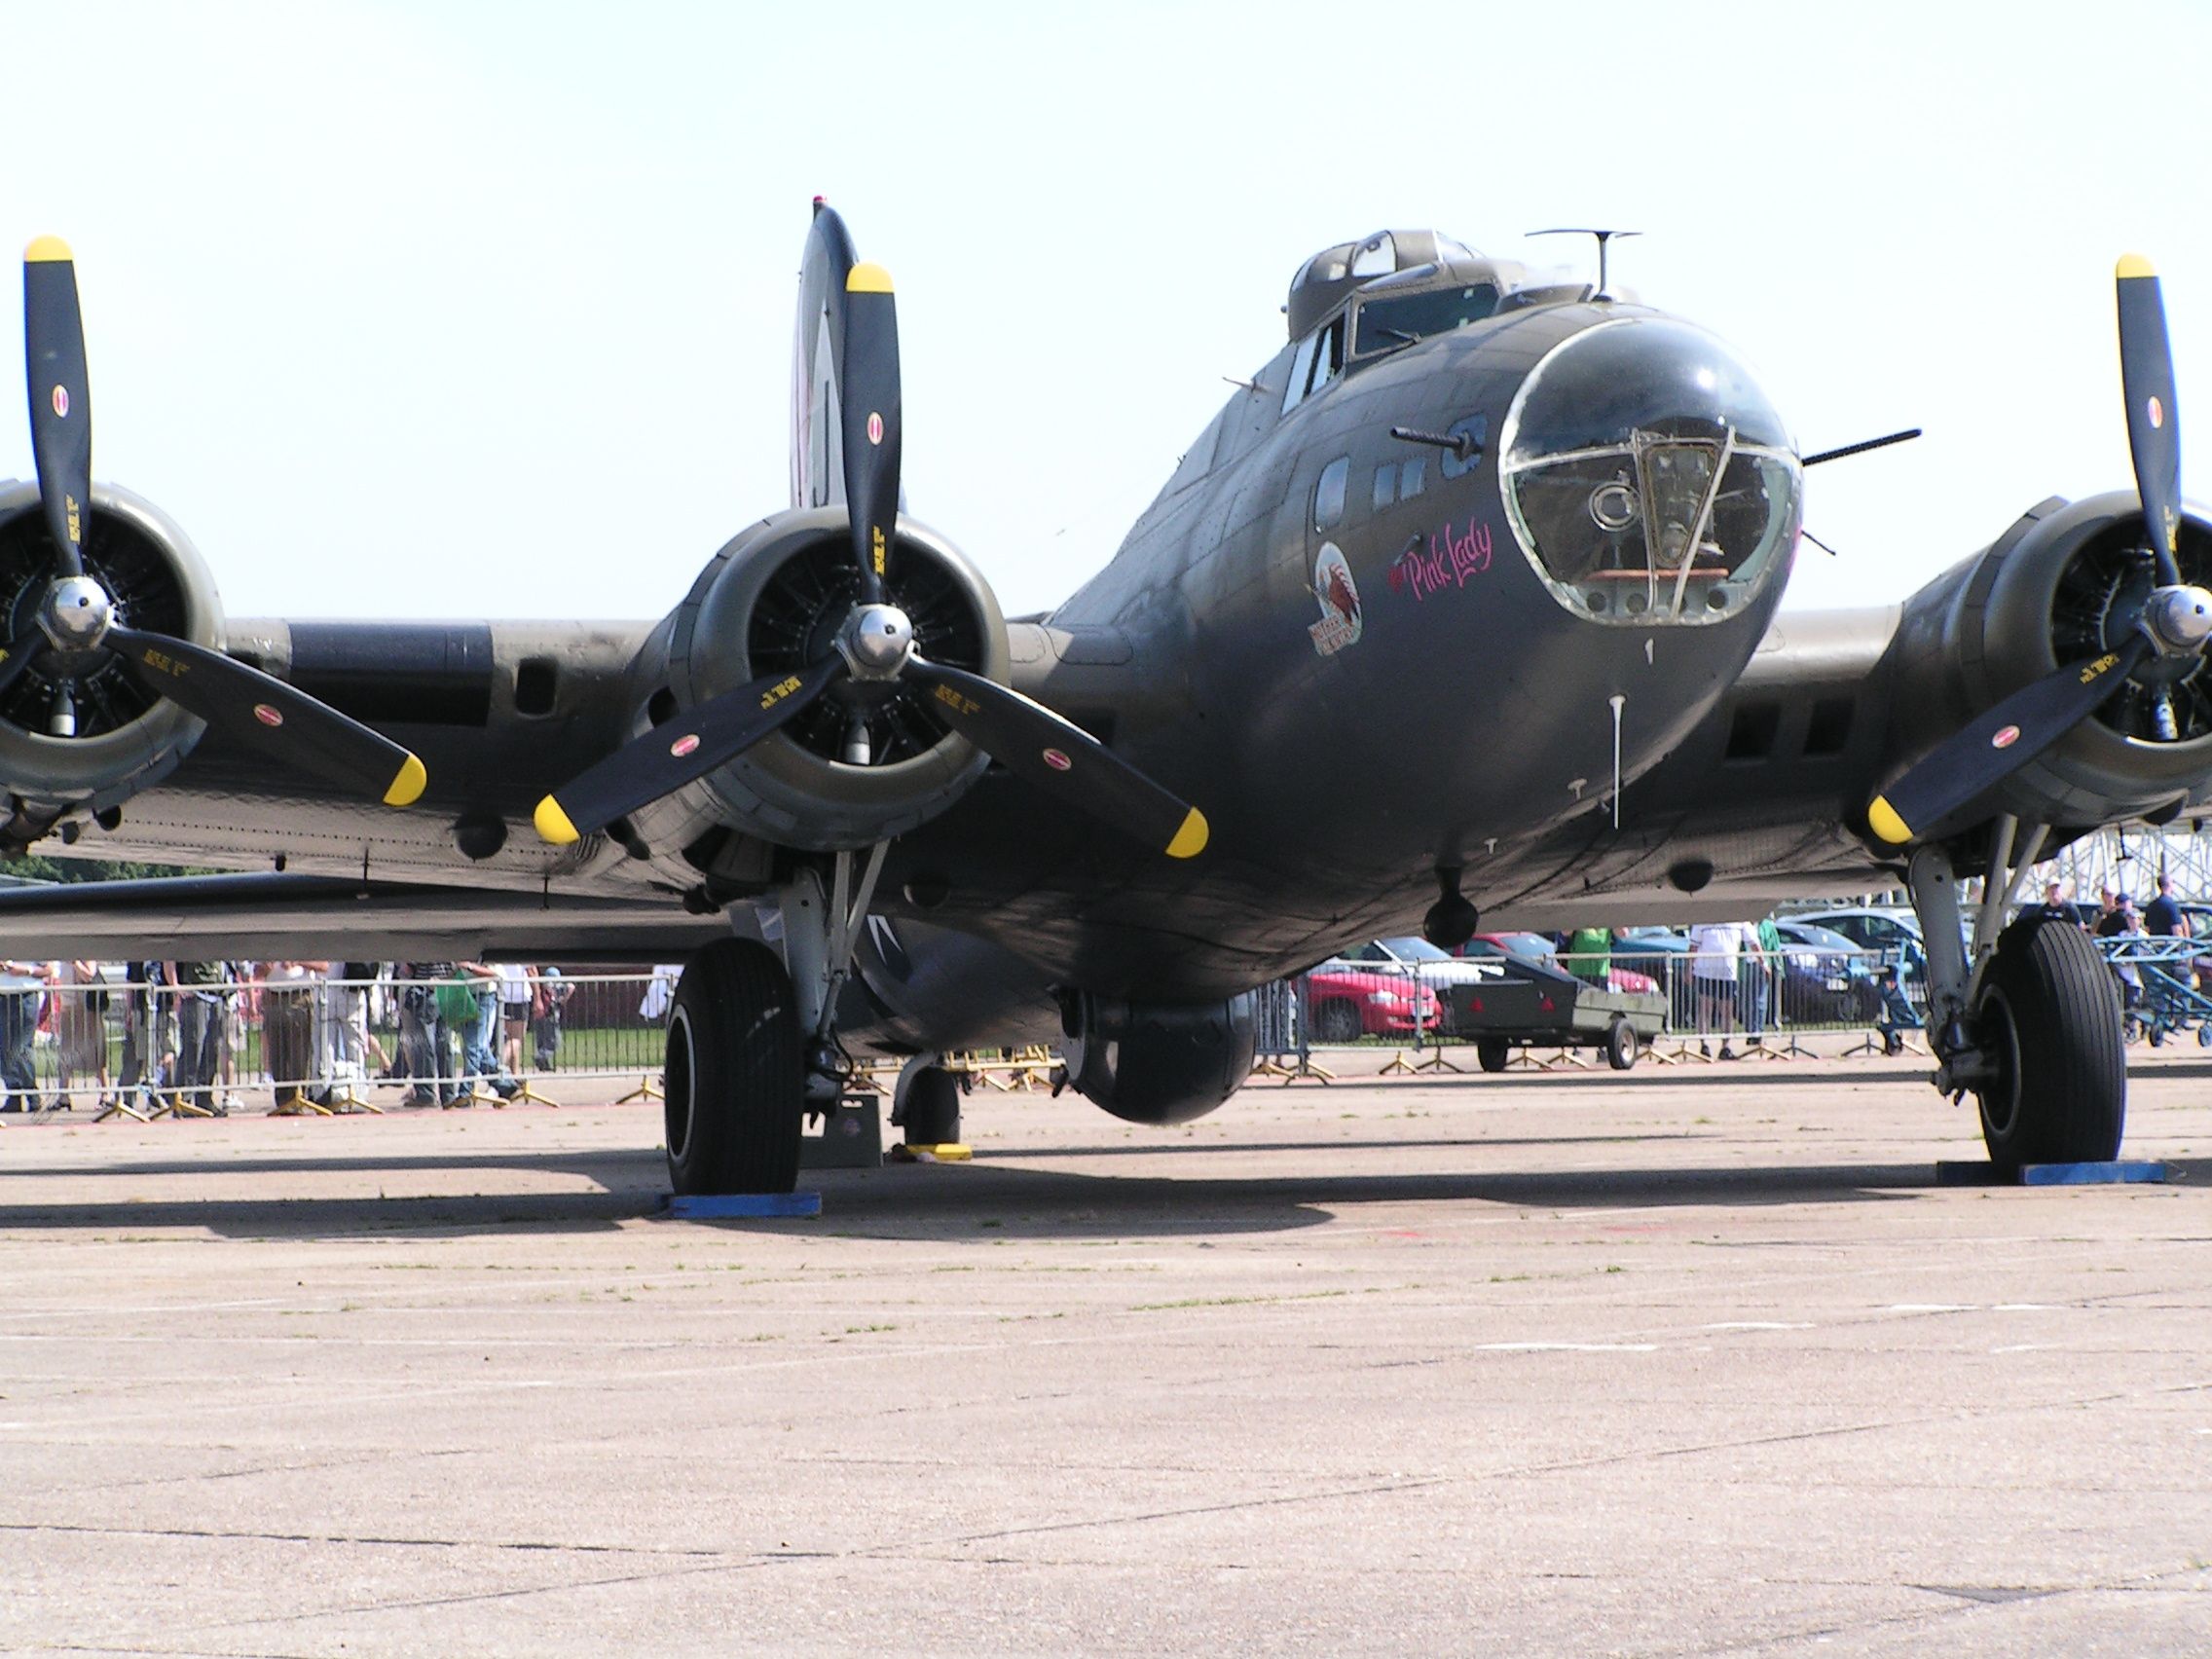 B-17 flying fortress 'pink lady'